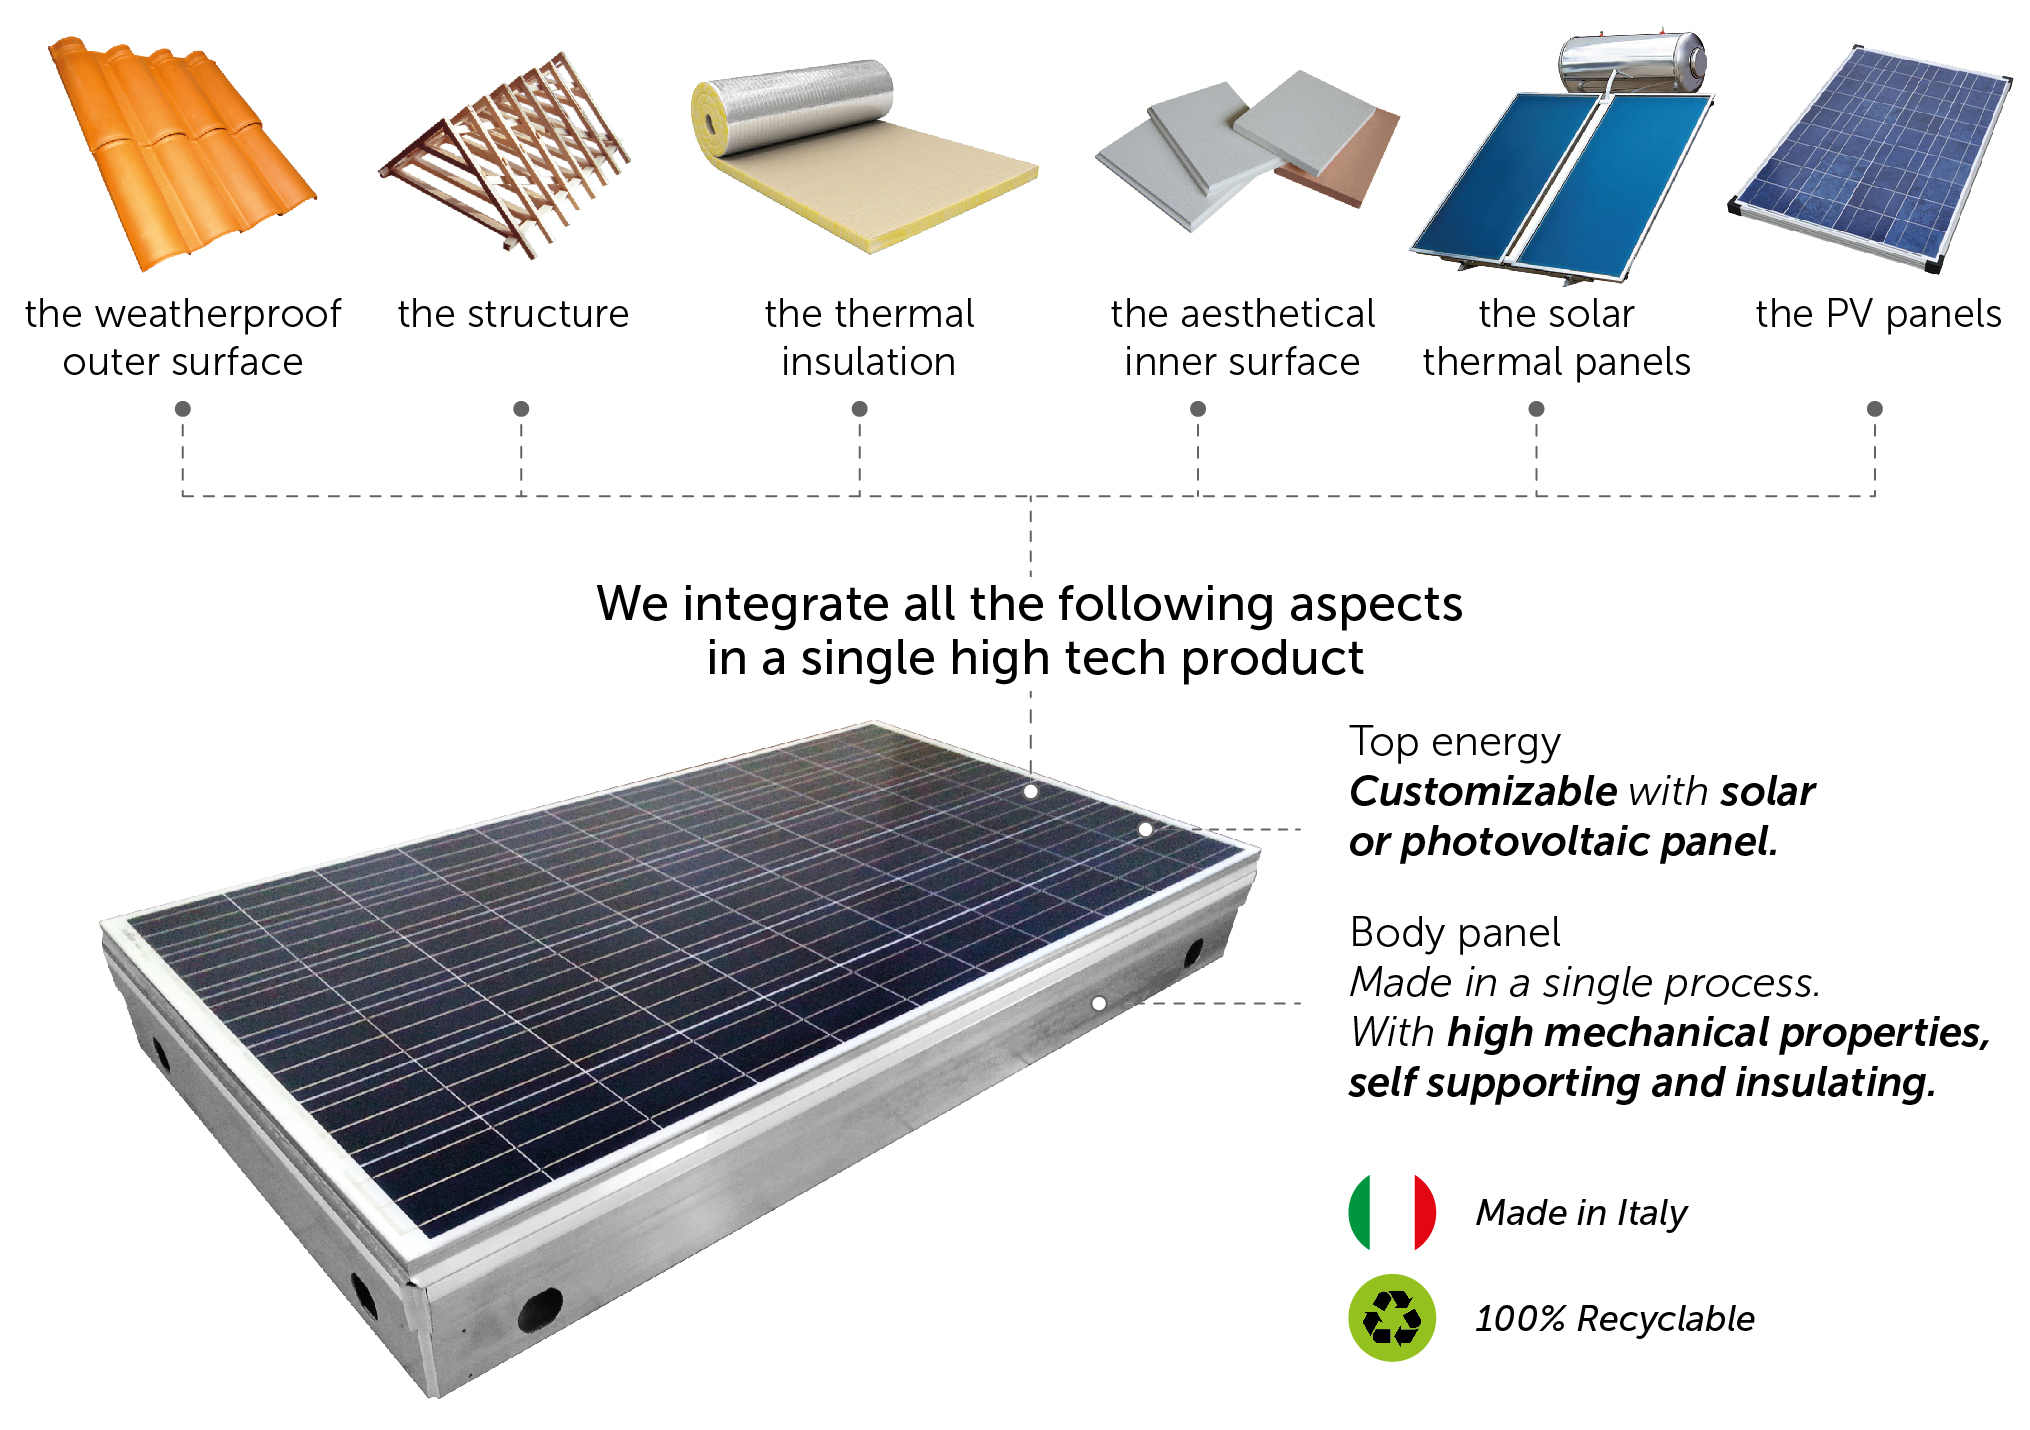 MAS roof - modular system for making modular roofs with integrated solar